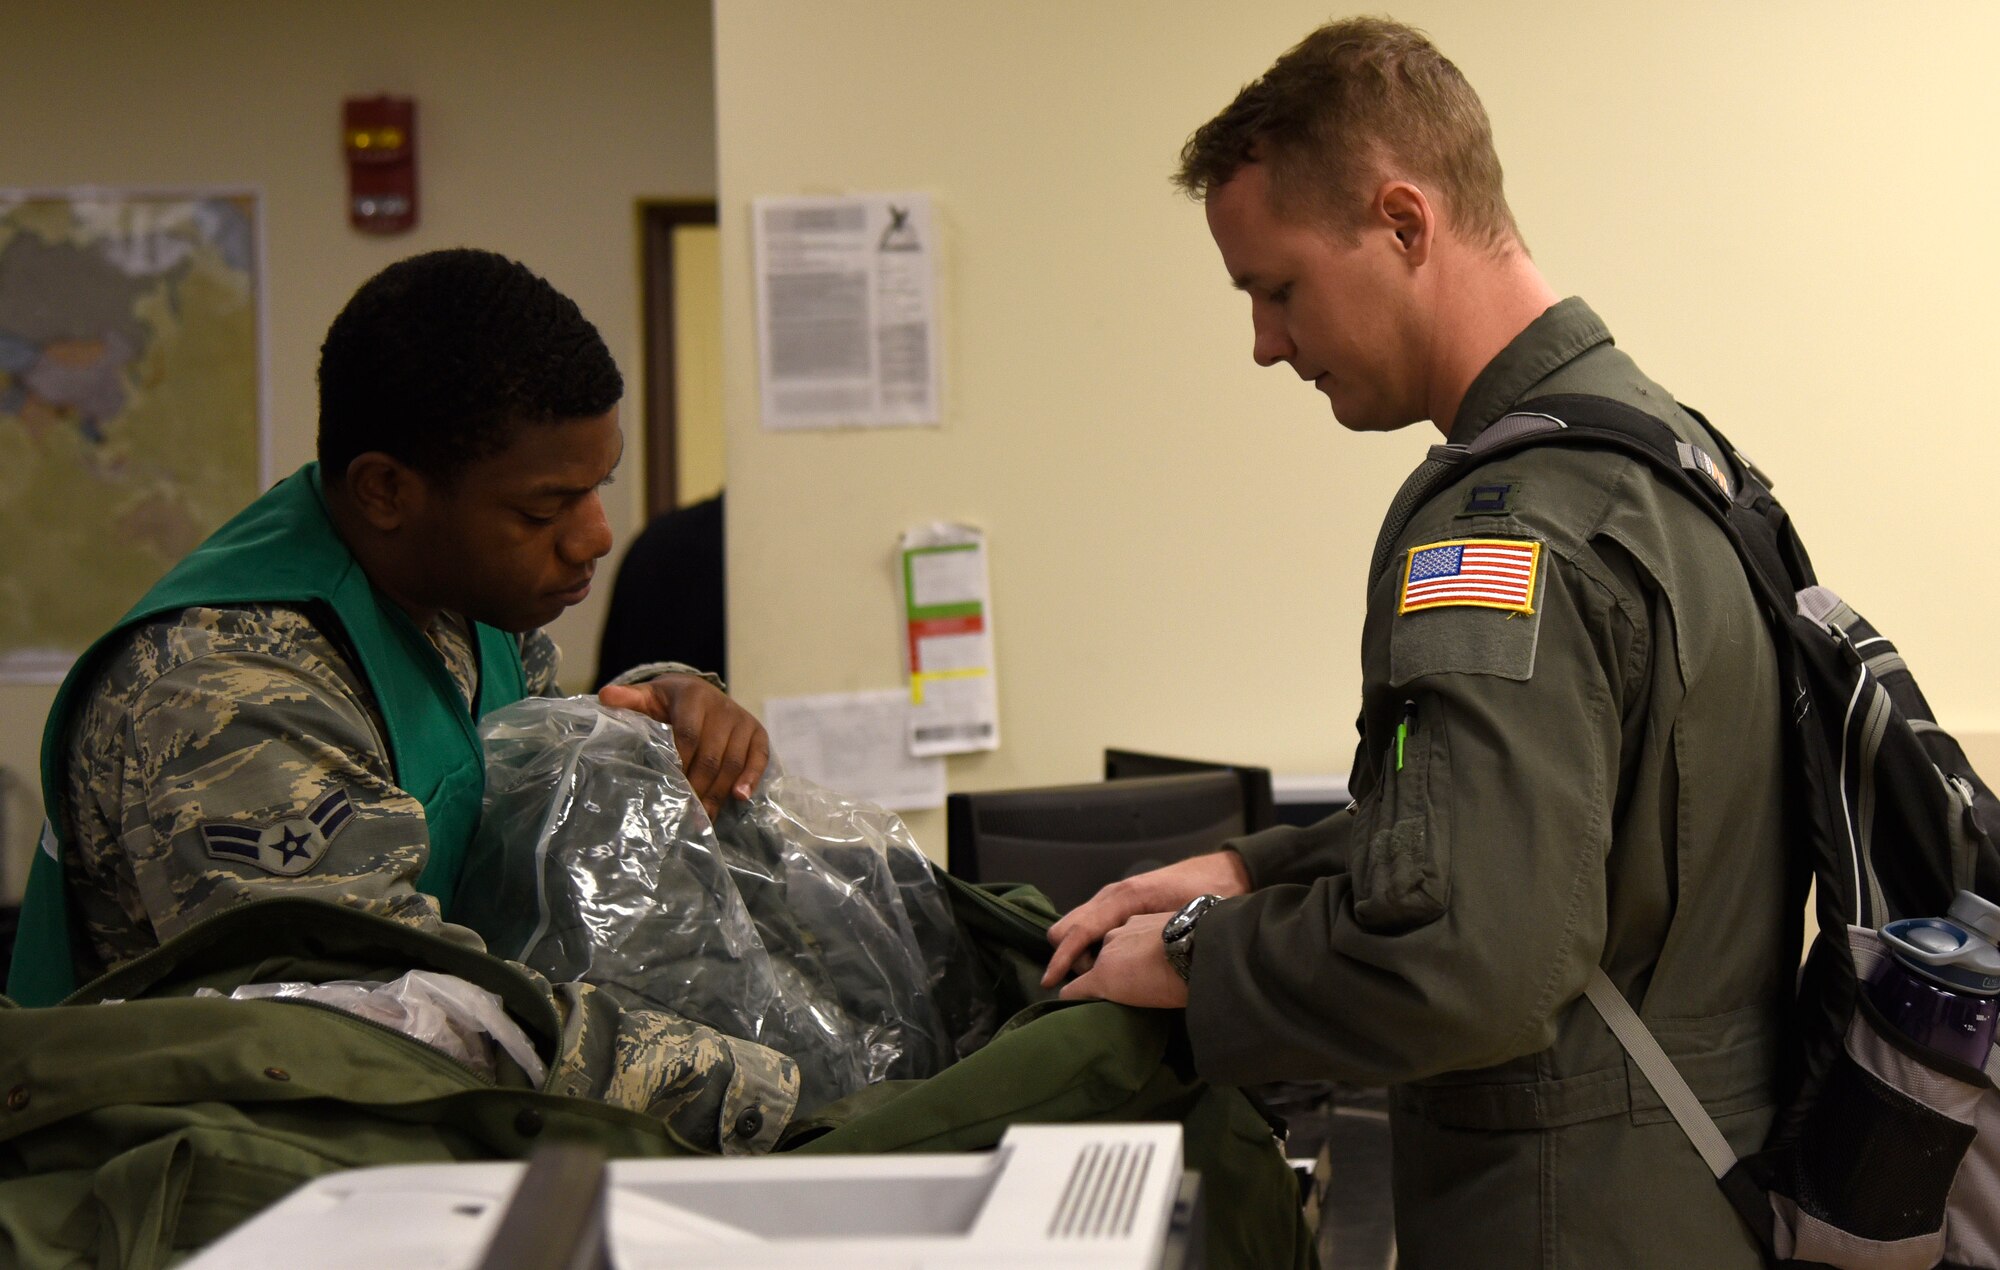 An Airman from the 22nd Logistics Readiness Squadron reviews mobility items prior to issuing the equipment during a mobility training exercise, Oct. 31, 2018, at McConnell Air Force Base, Kan. This process ensures Airmen have all of the required items if deploying in support of a contingency. Global Thunder involves extensive planning and coordination and provides unique training opportunities and assessments for all U.S. Strategic Command mission areas and joint and field training operational readiness, with a specific focus on nuclear readiness. The training is based on a notional scenario exercise to test readiness and ensure a safe, secure, ready and reliable strategic deterrent force. (U.S. Air Force photo by Airman 1st Class Michaela R. Slanchik)